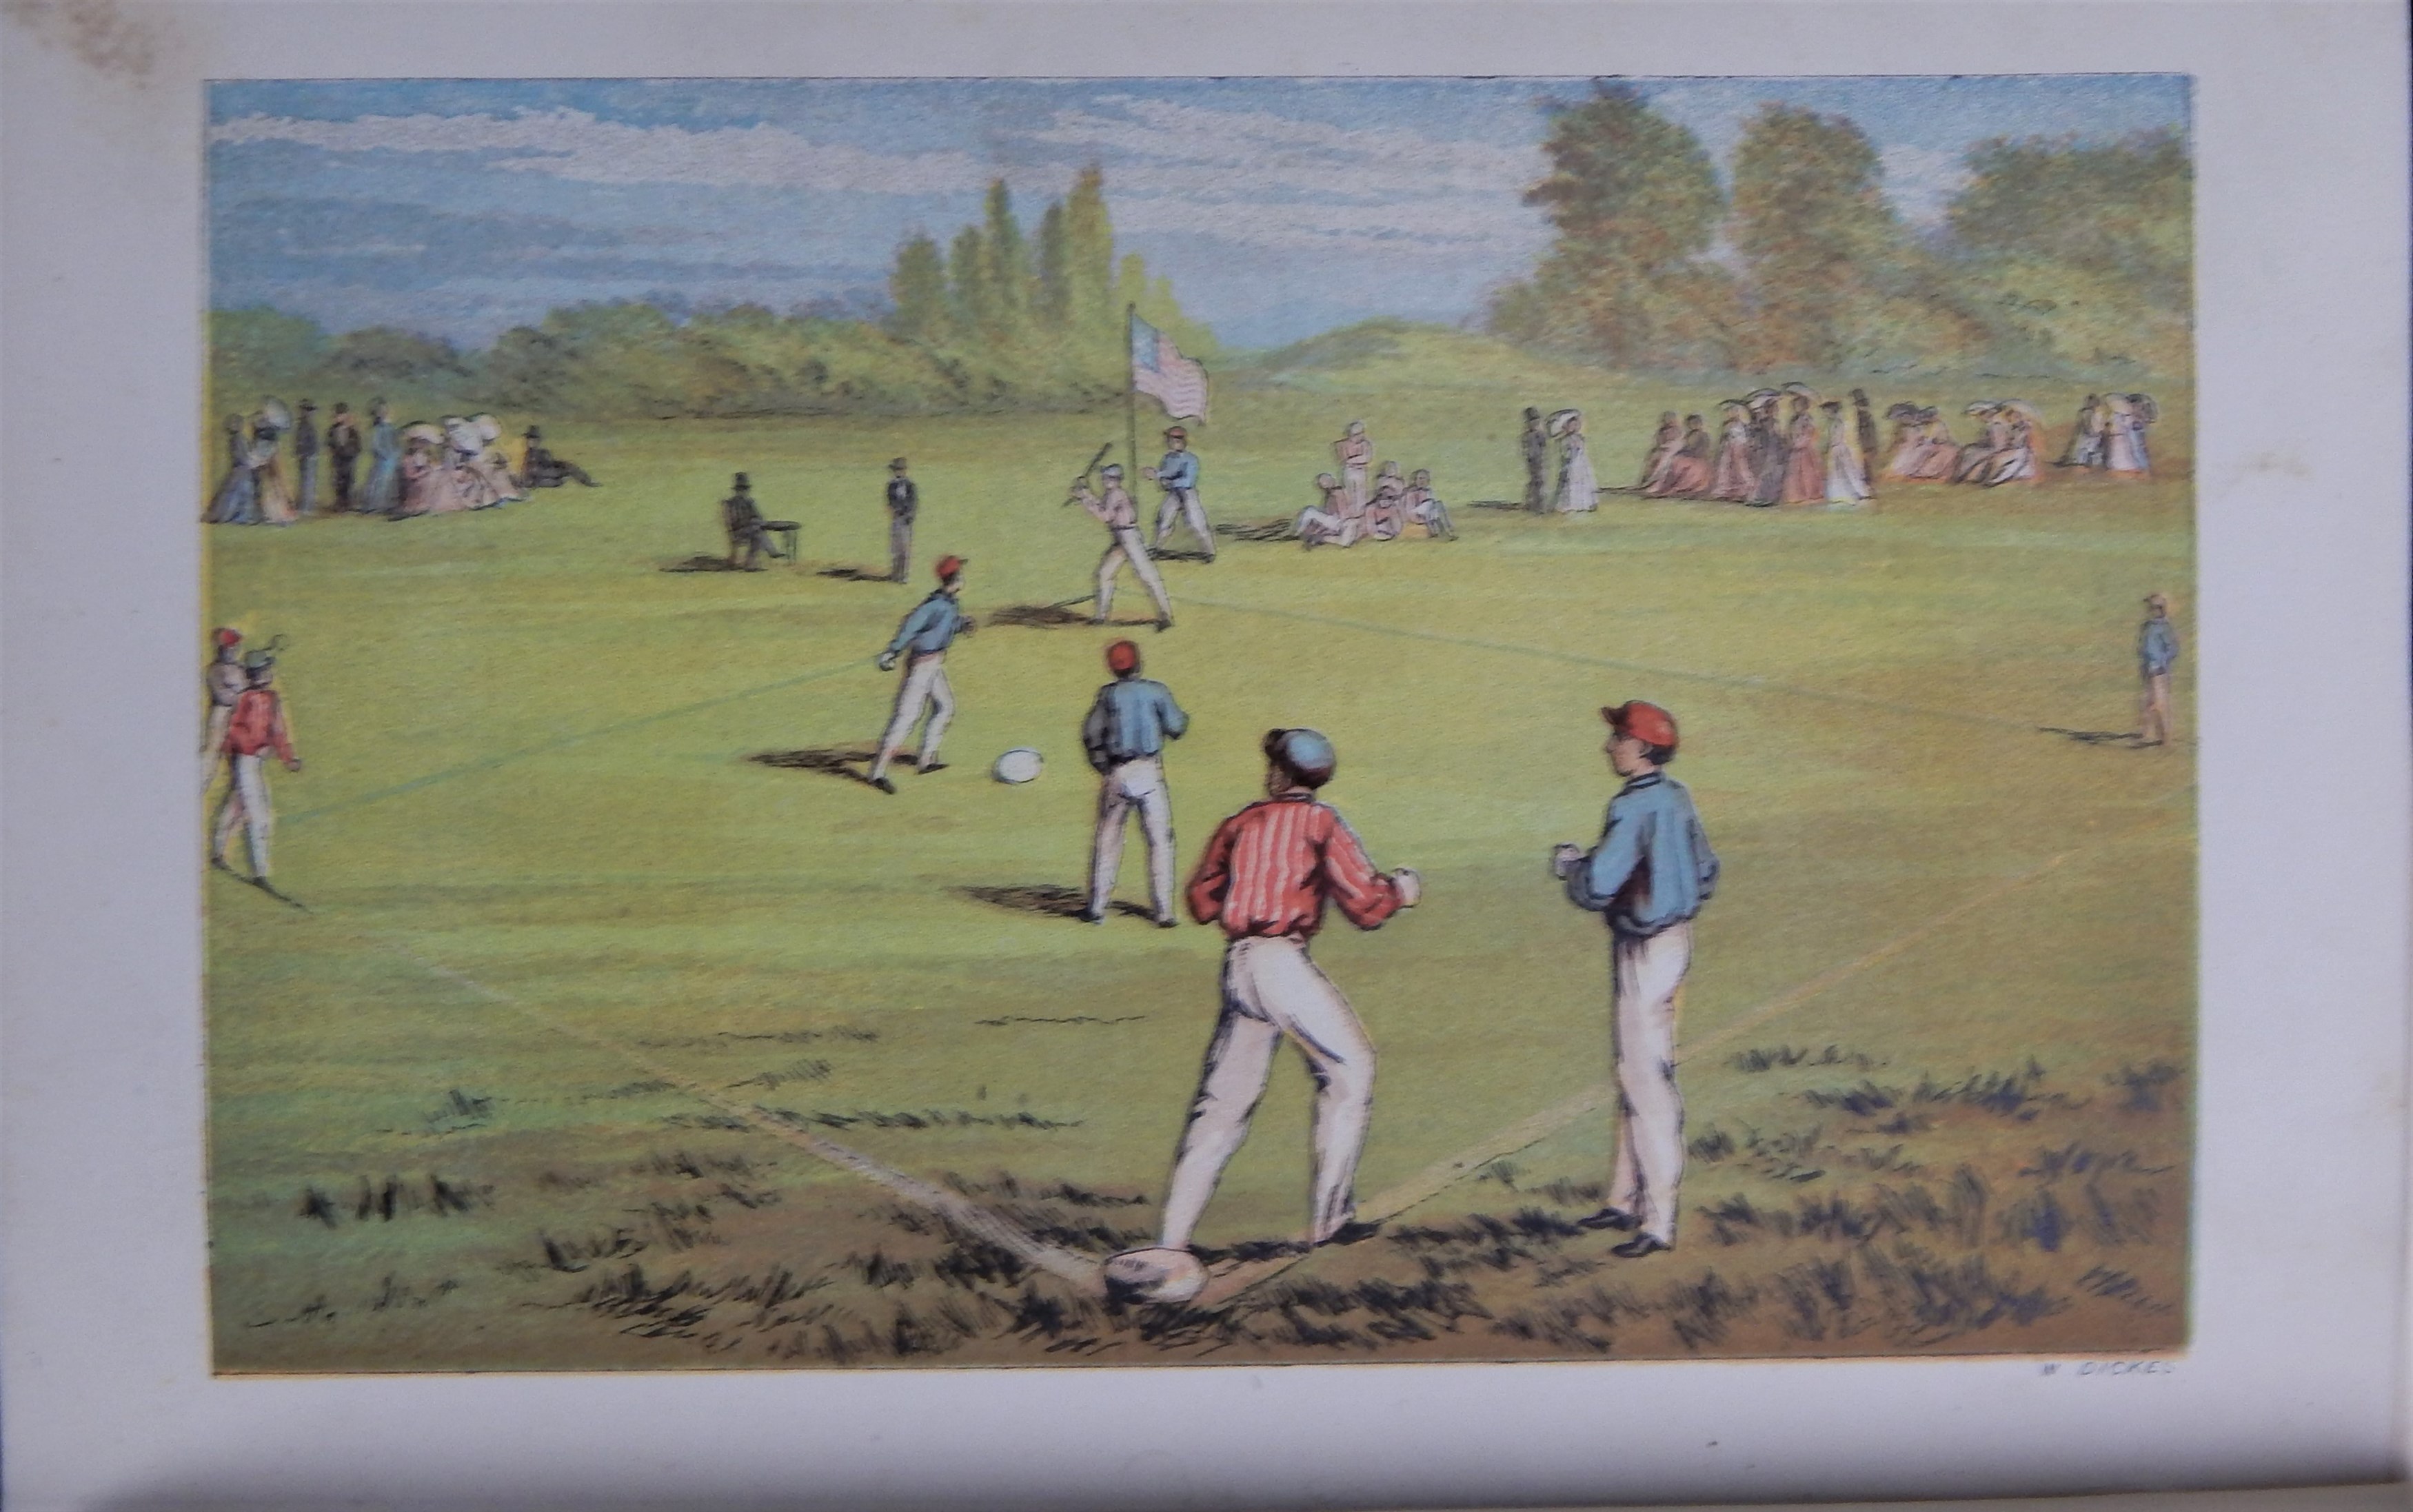 Best of the Best - Important Early Baseball Book (1864)